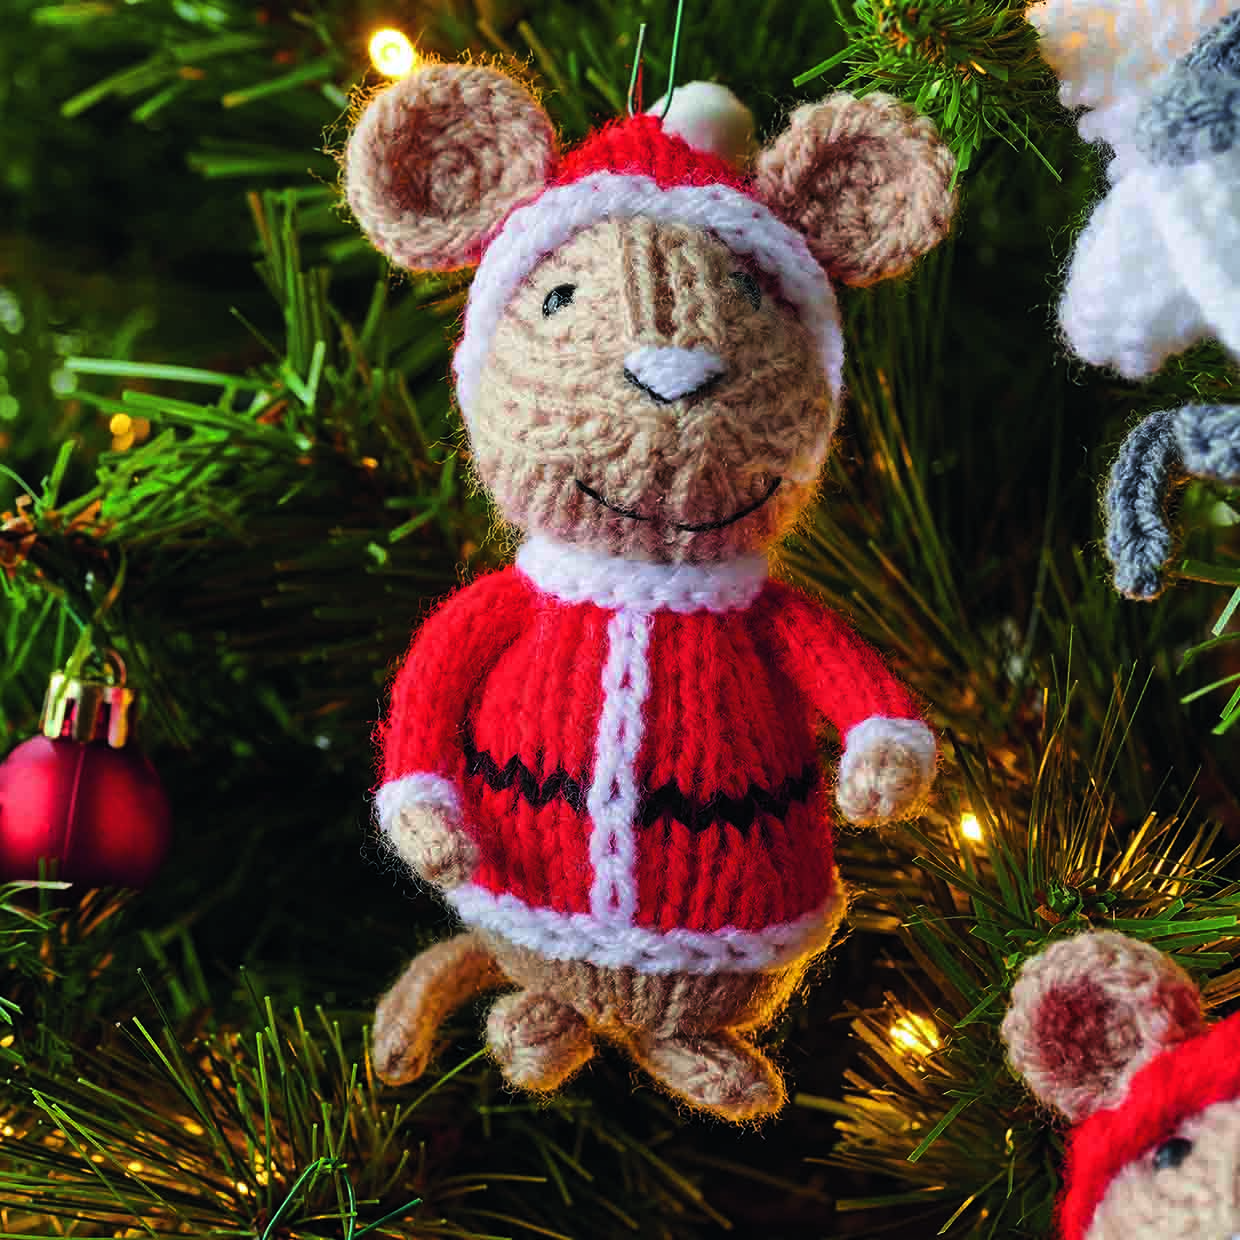 You can see the whole of the santa mouse hanging atom a chtosymas tree, with his knitted santa suit and hat and hit white embroidered nose with black embroidered outline and smiling embroidered mouth